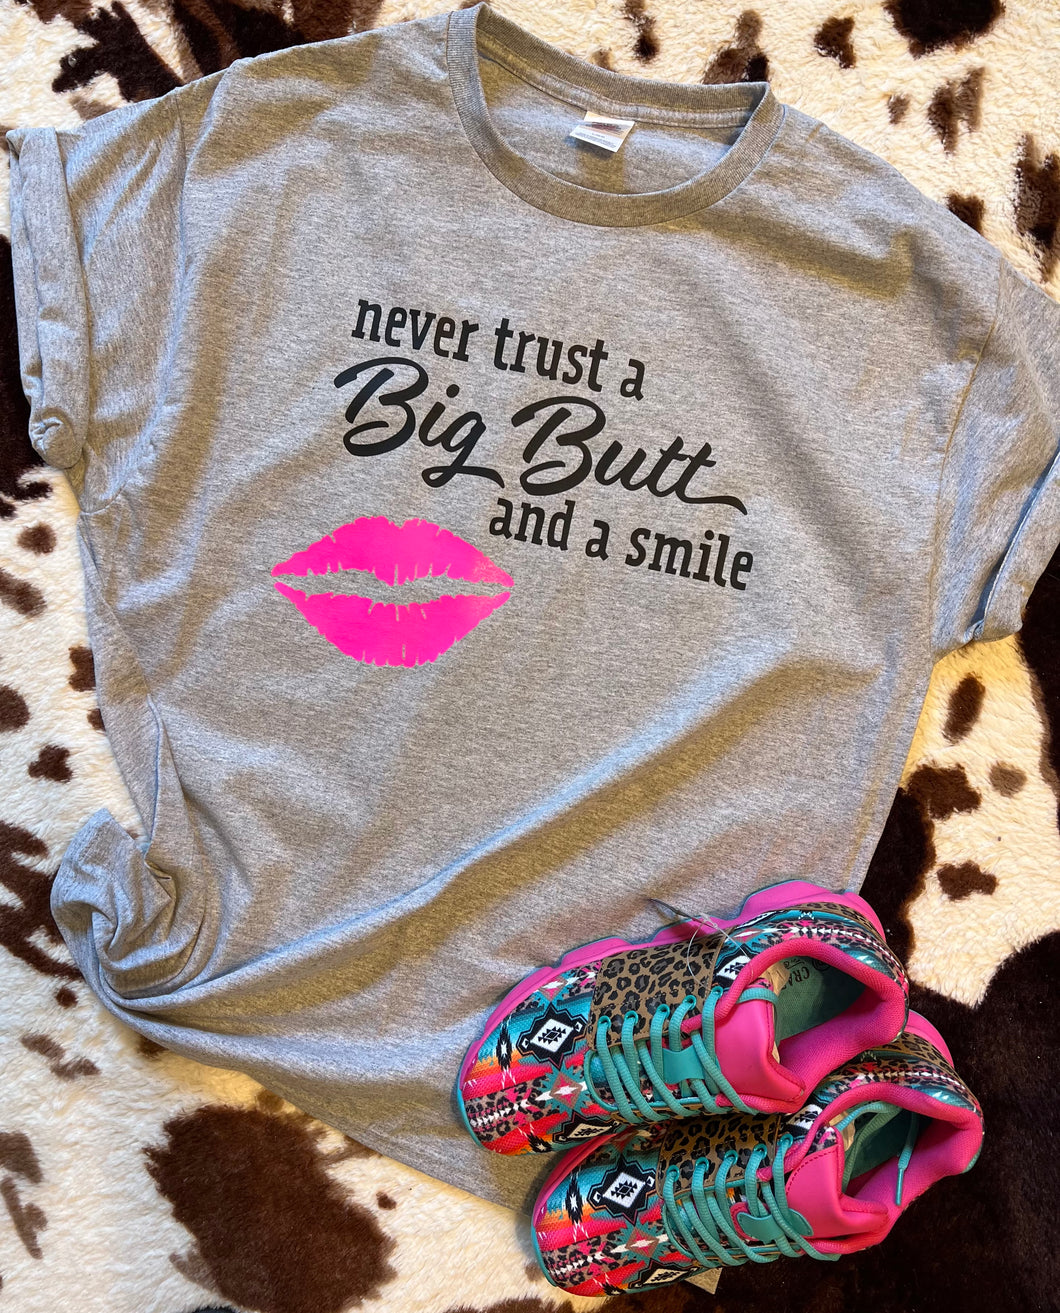 Never trust a big butt and a smile funny graphic tee - Mavictoria Designs Hot Press Express